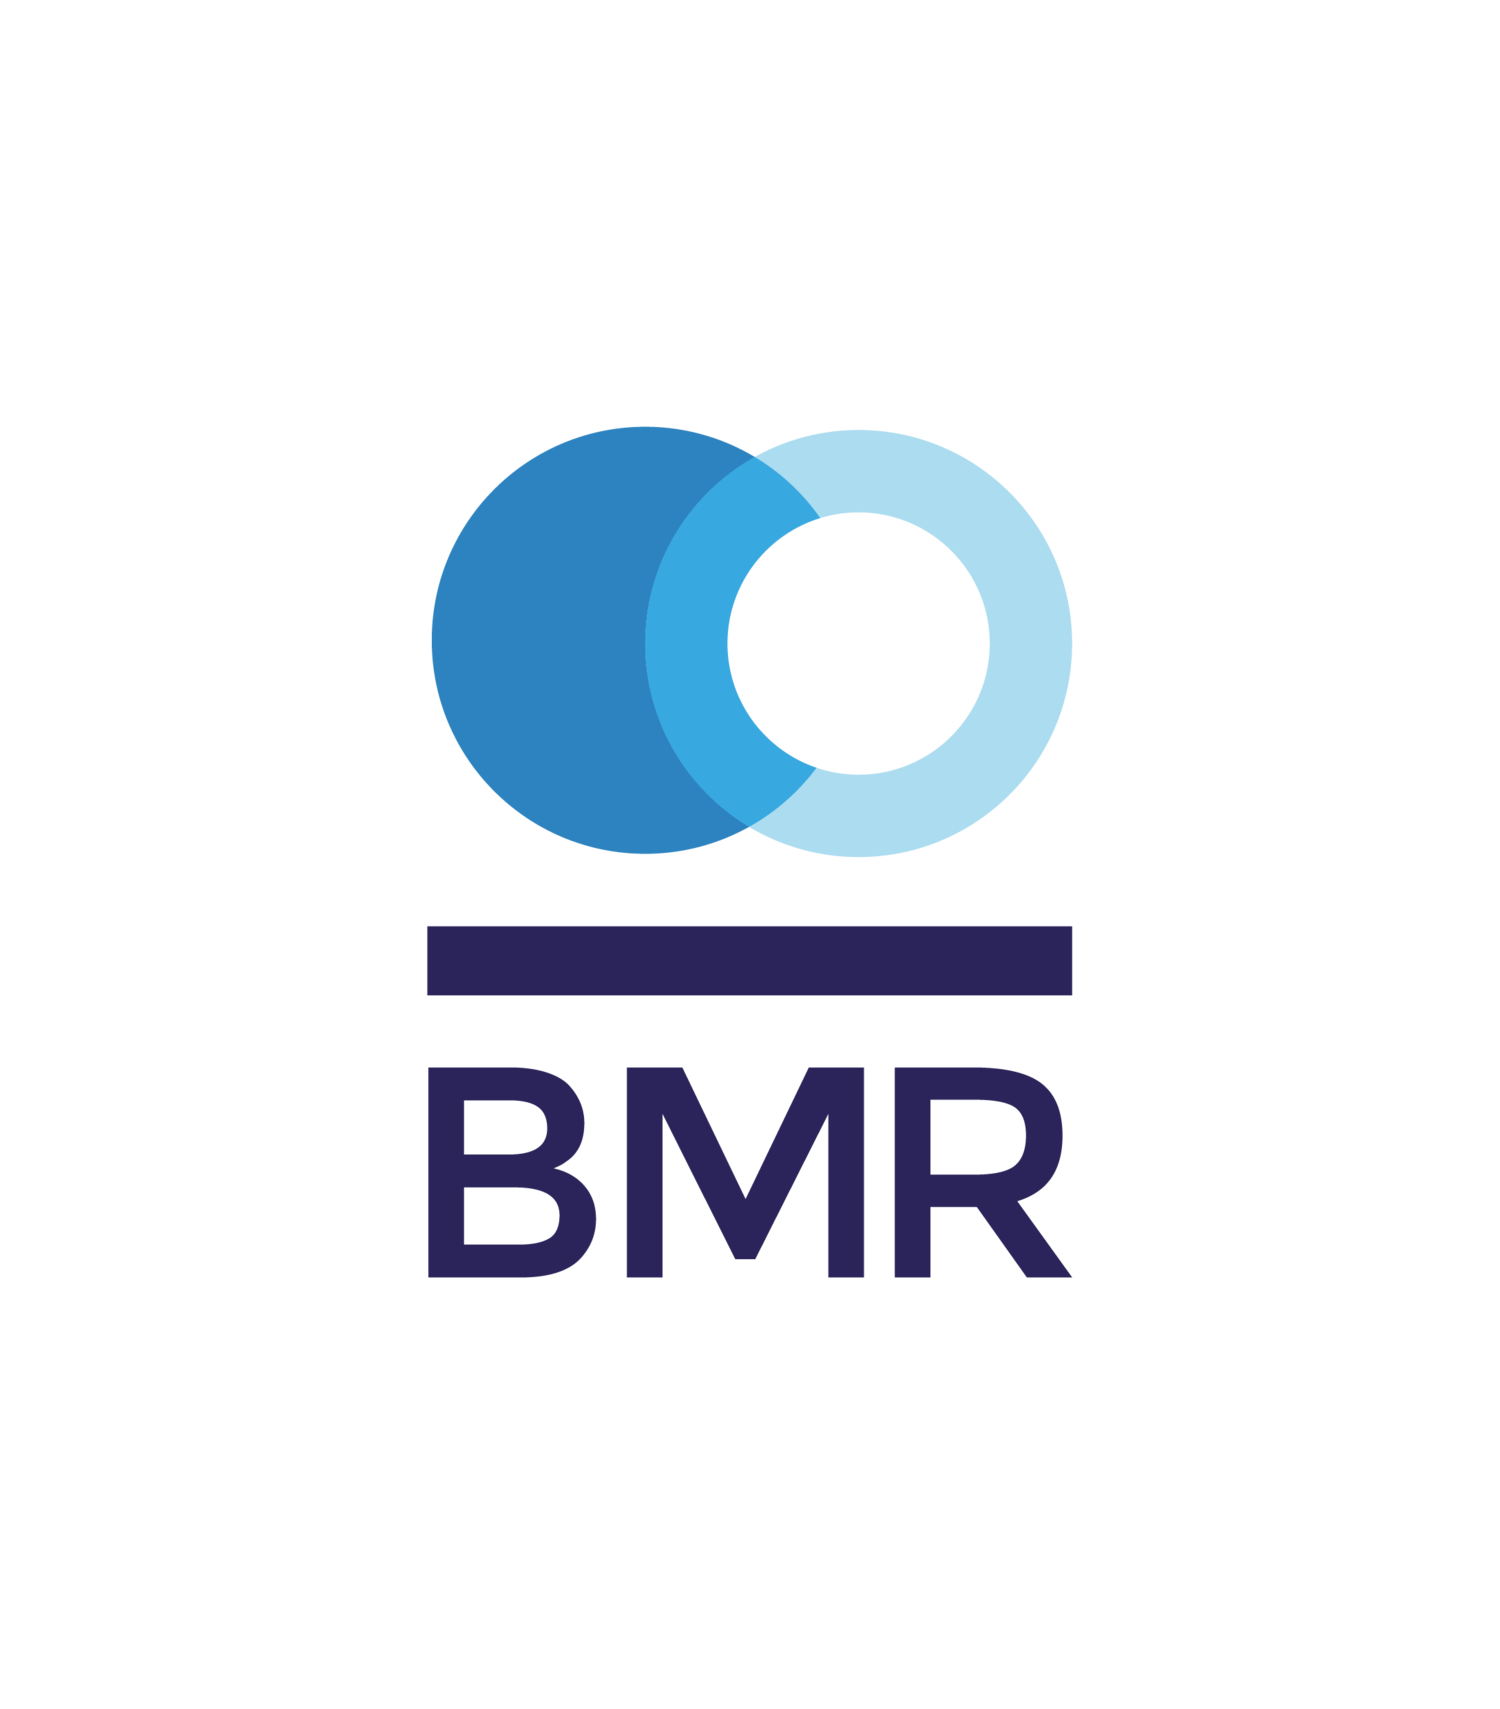 The Official BMR Site | One supplier, for all your wellbeing, belonging and leadership needs